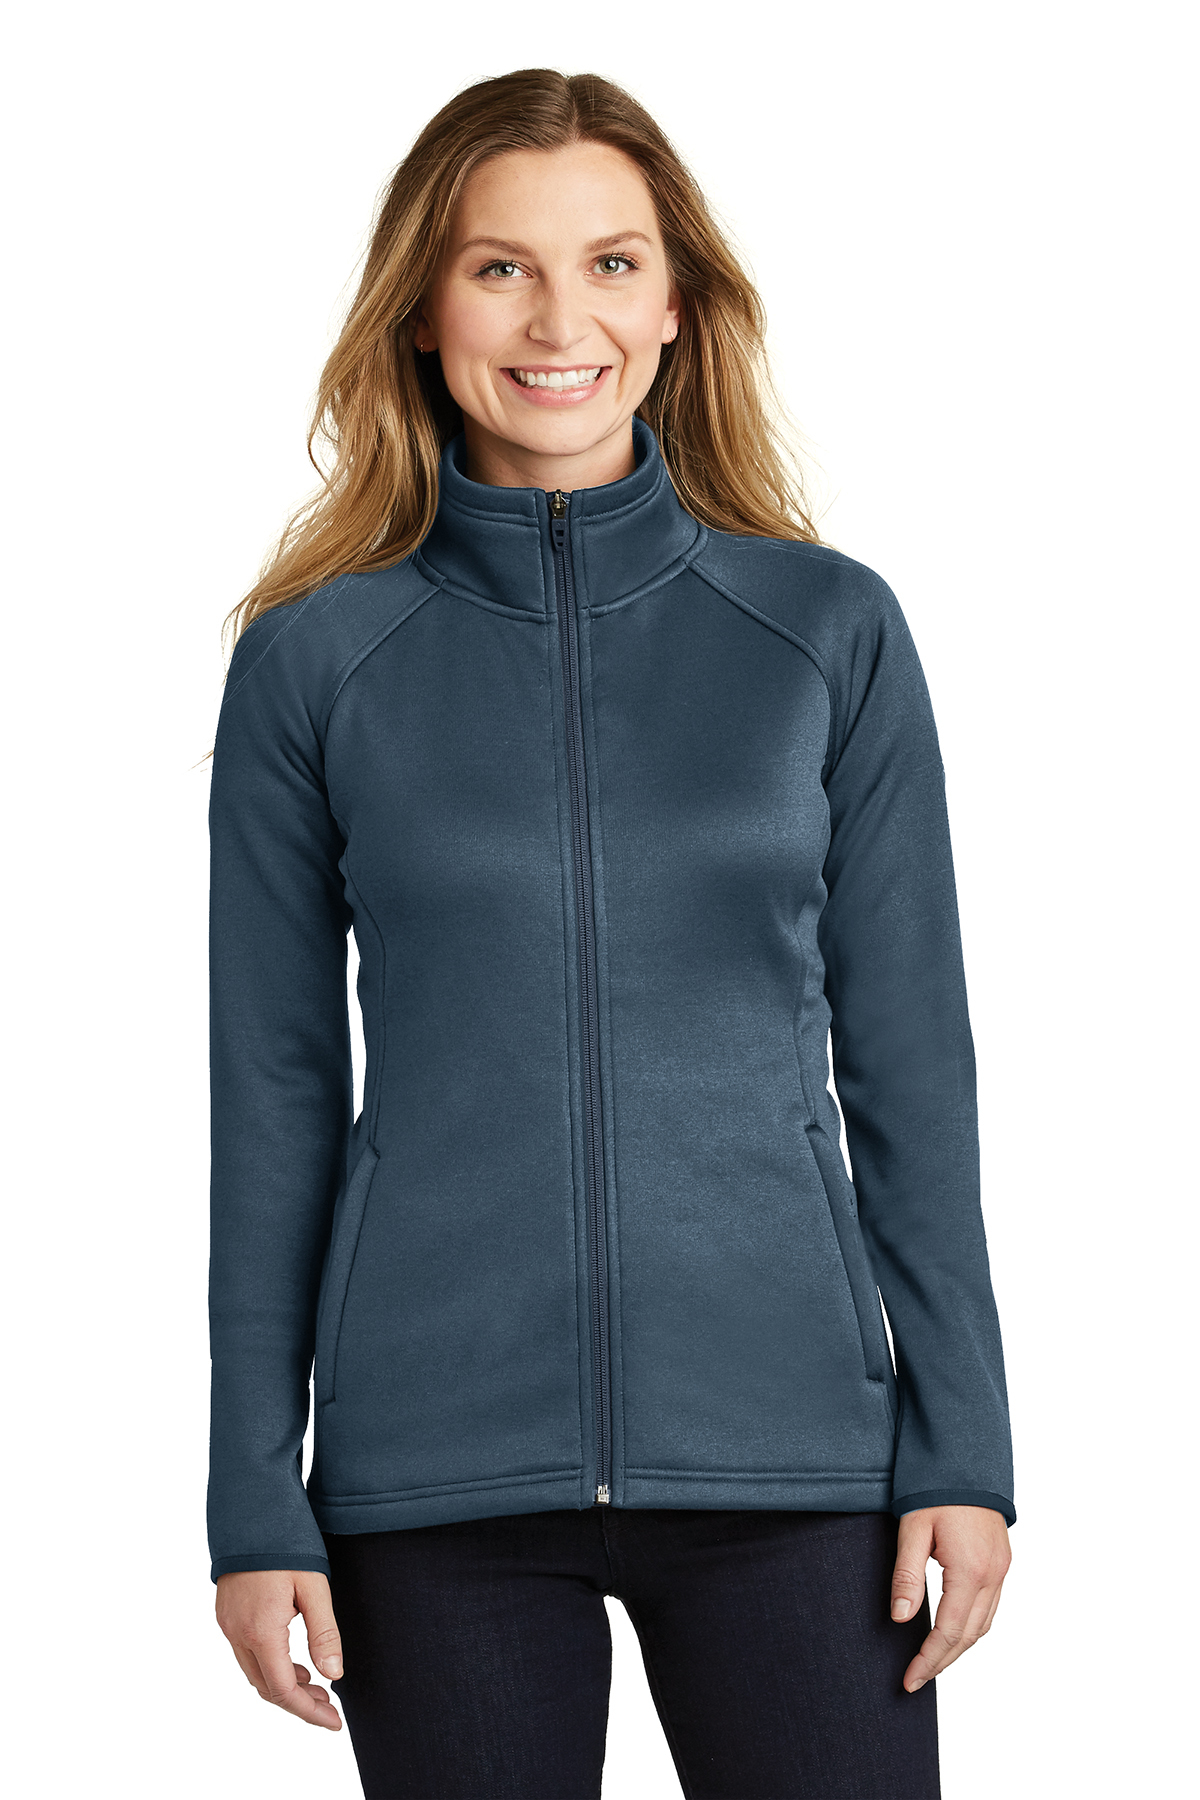 The North Face® NF0A3LH5 - Ladies DryVent Rain Jacket $103.95 - Women's ...